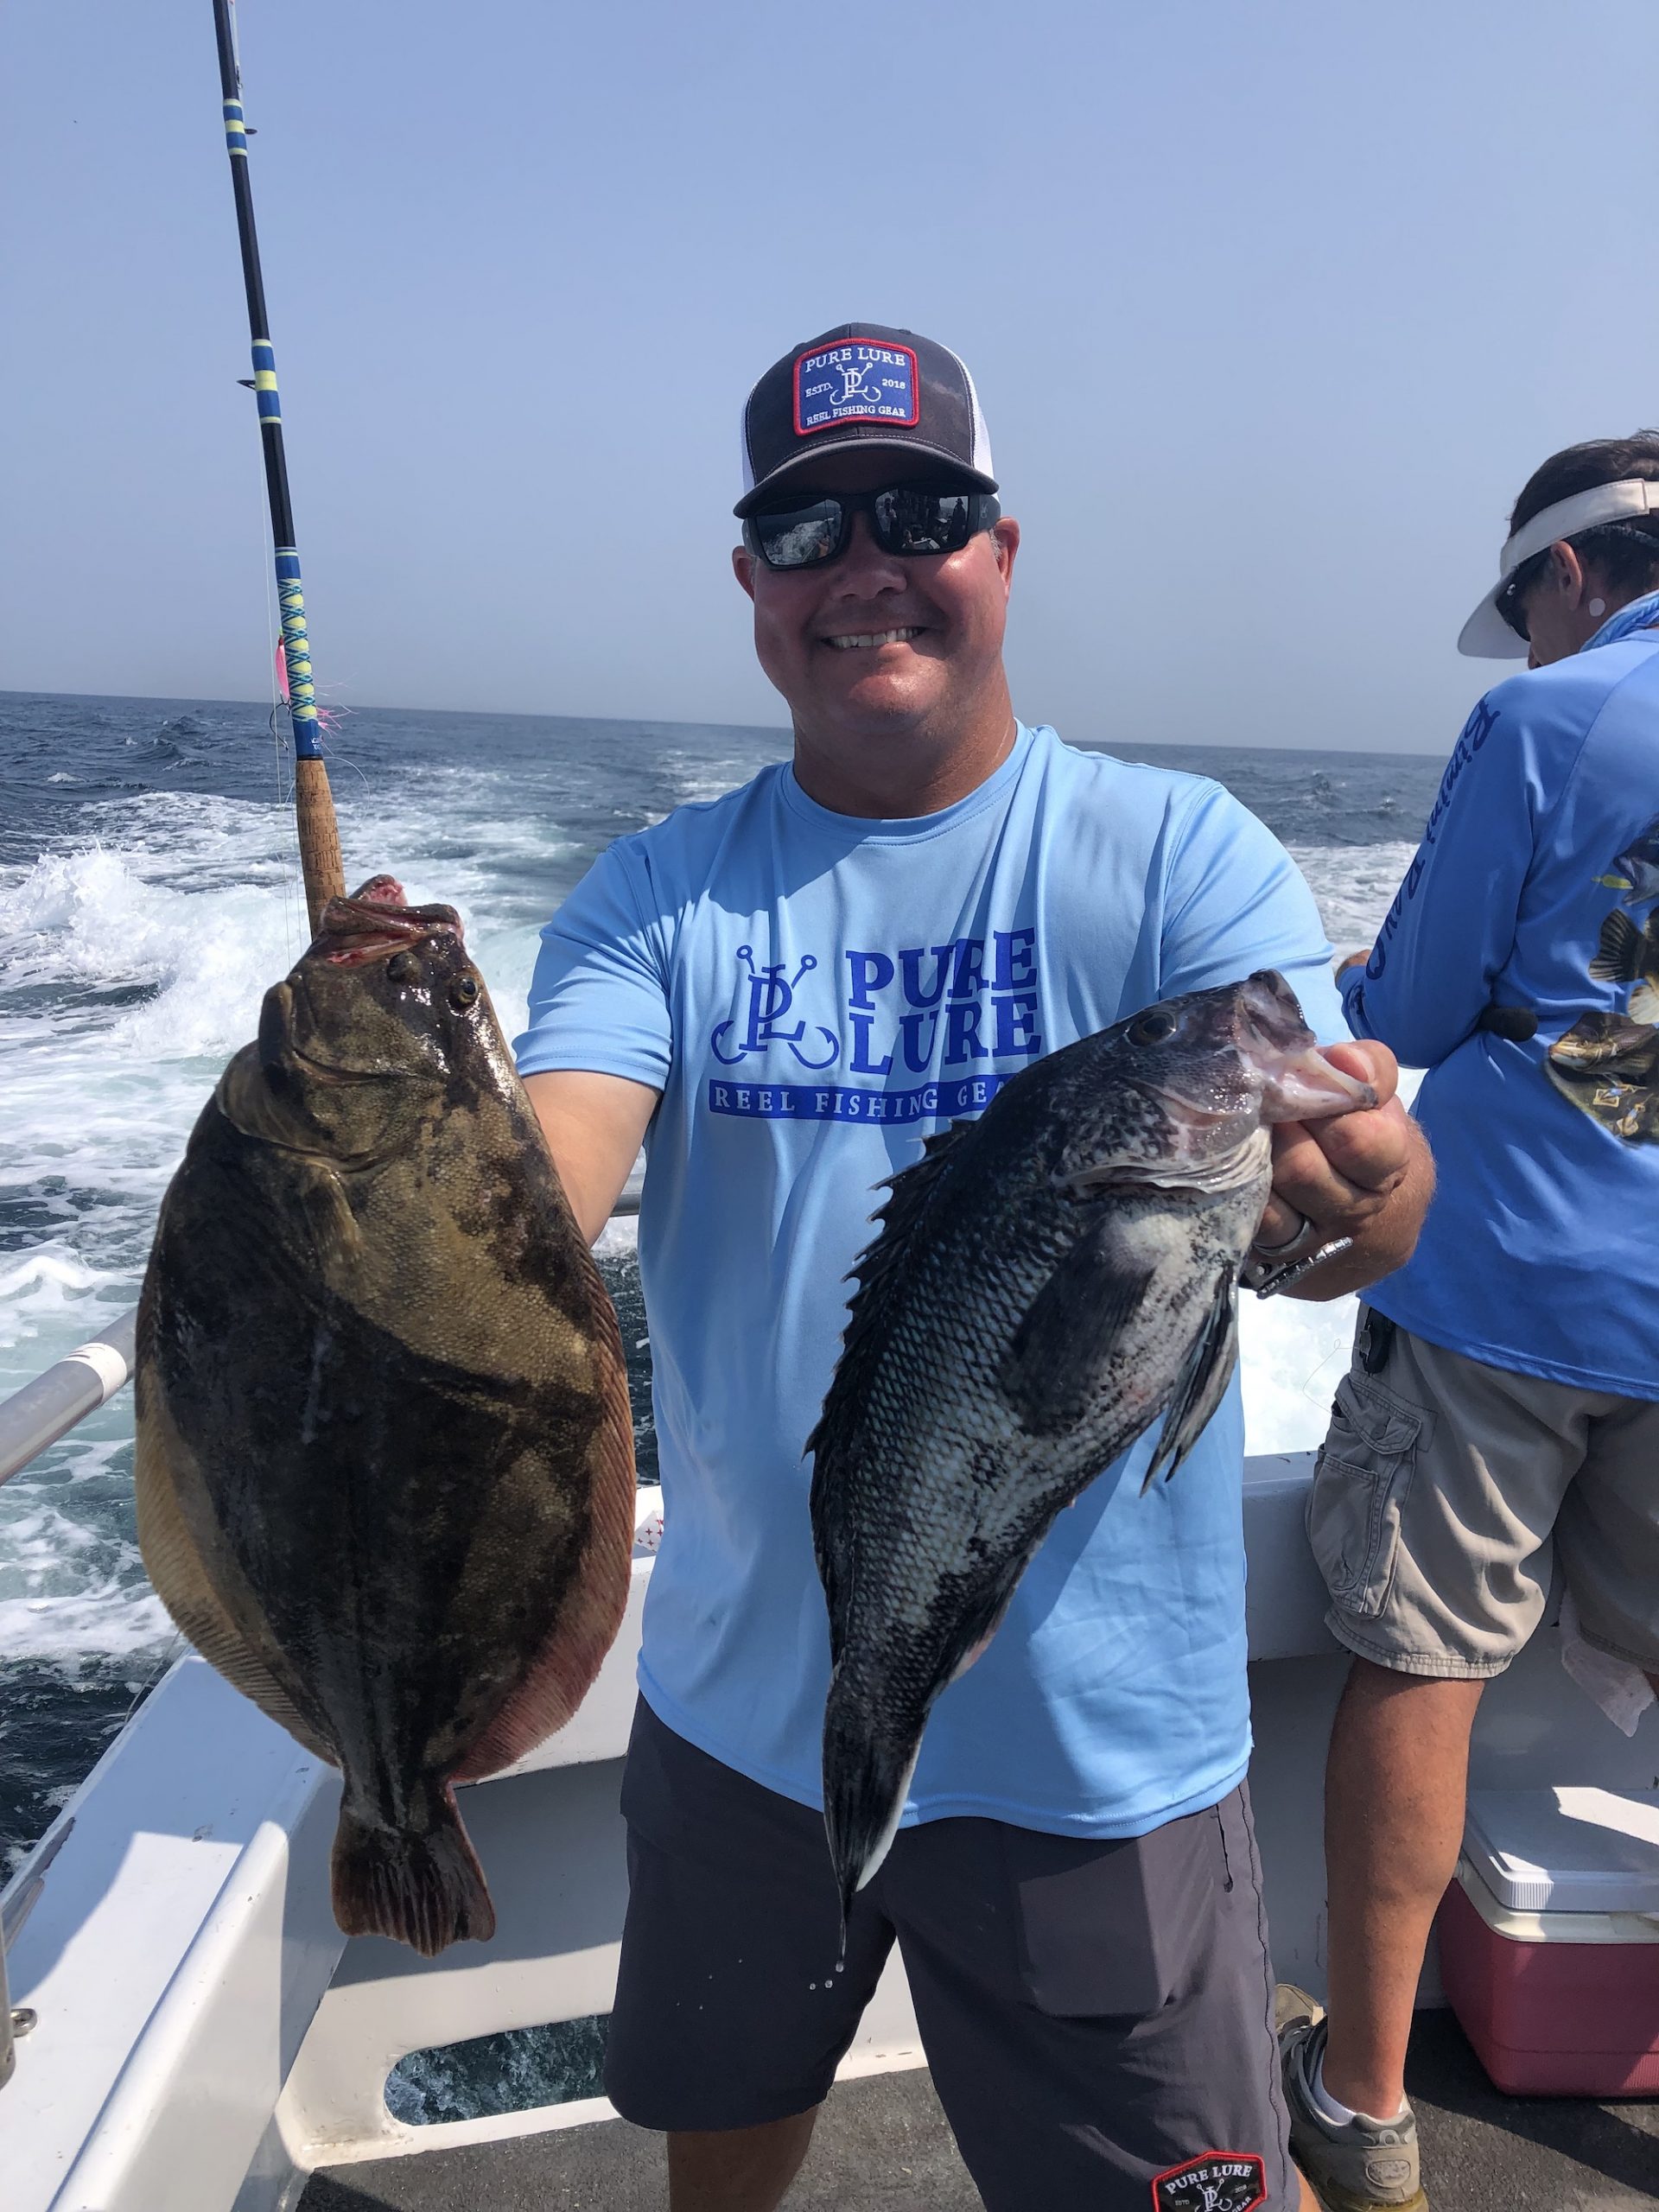 Great Day on The Rip - Ocean City MD Fishing